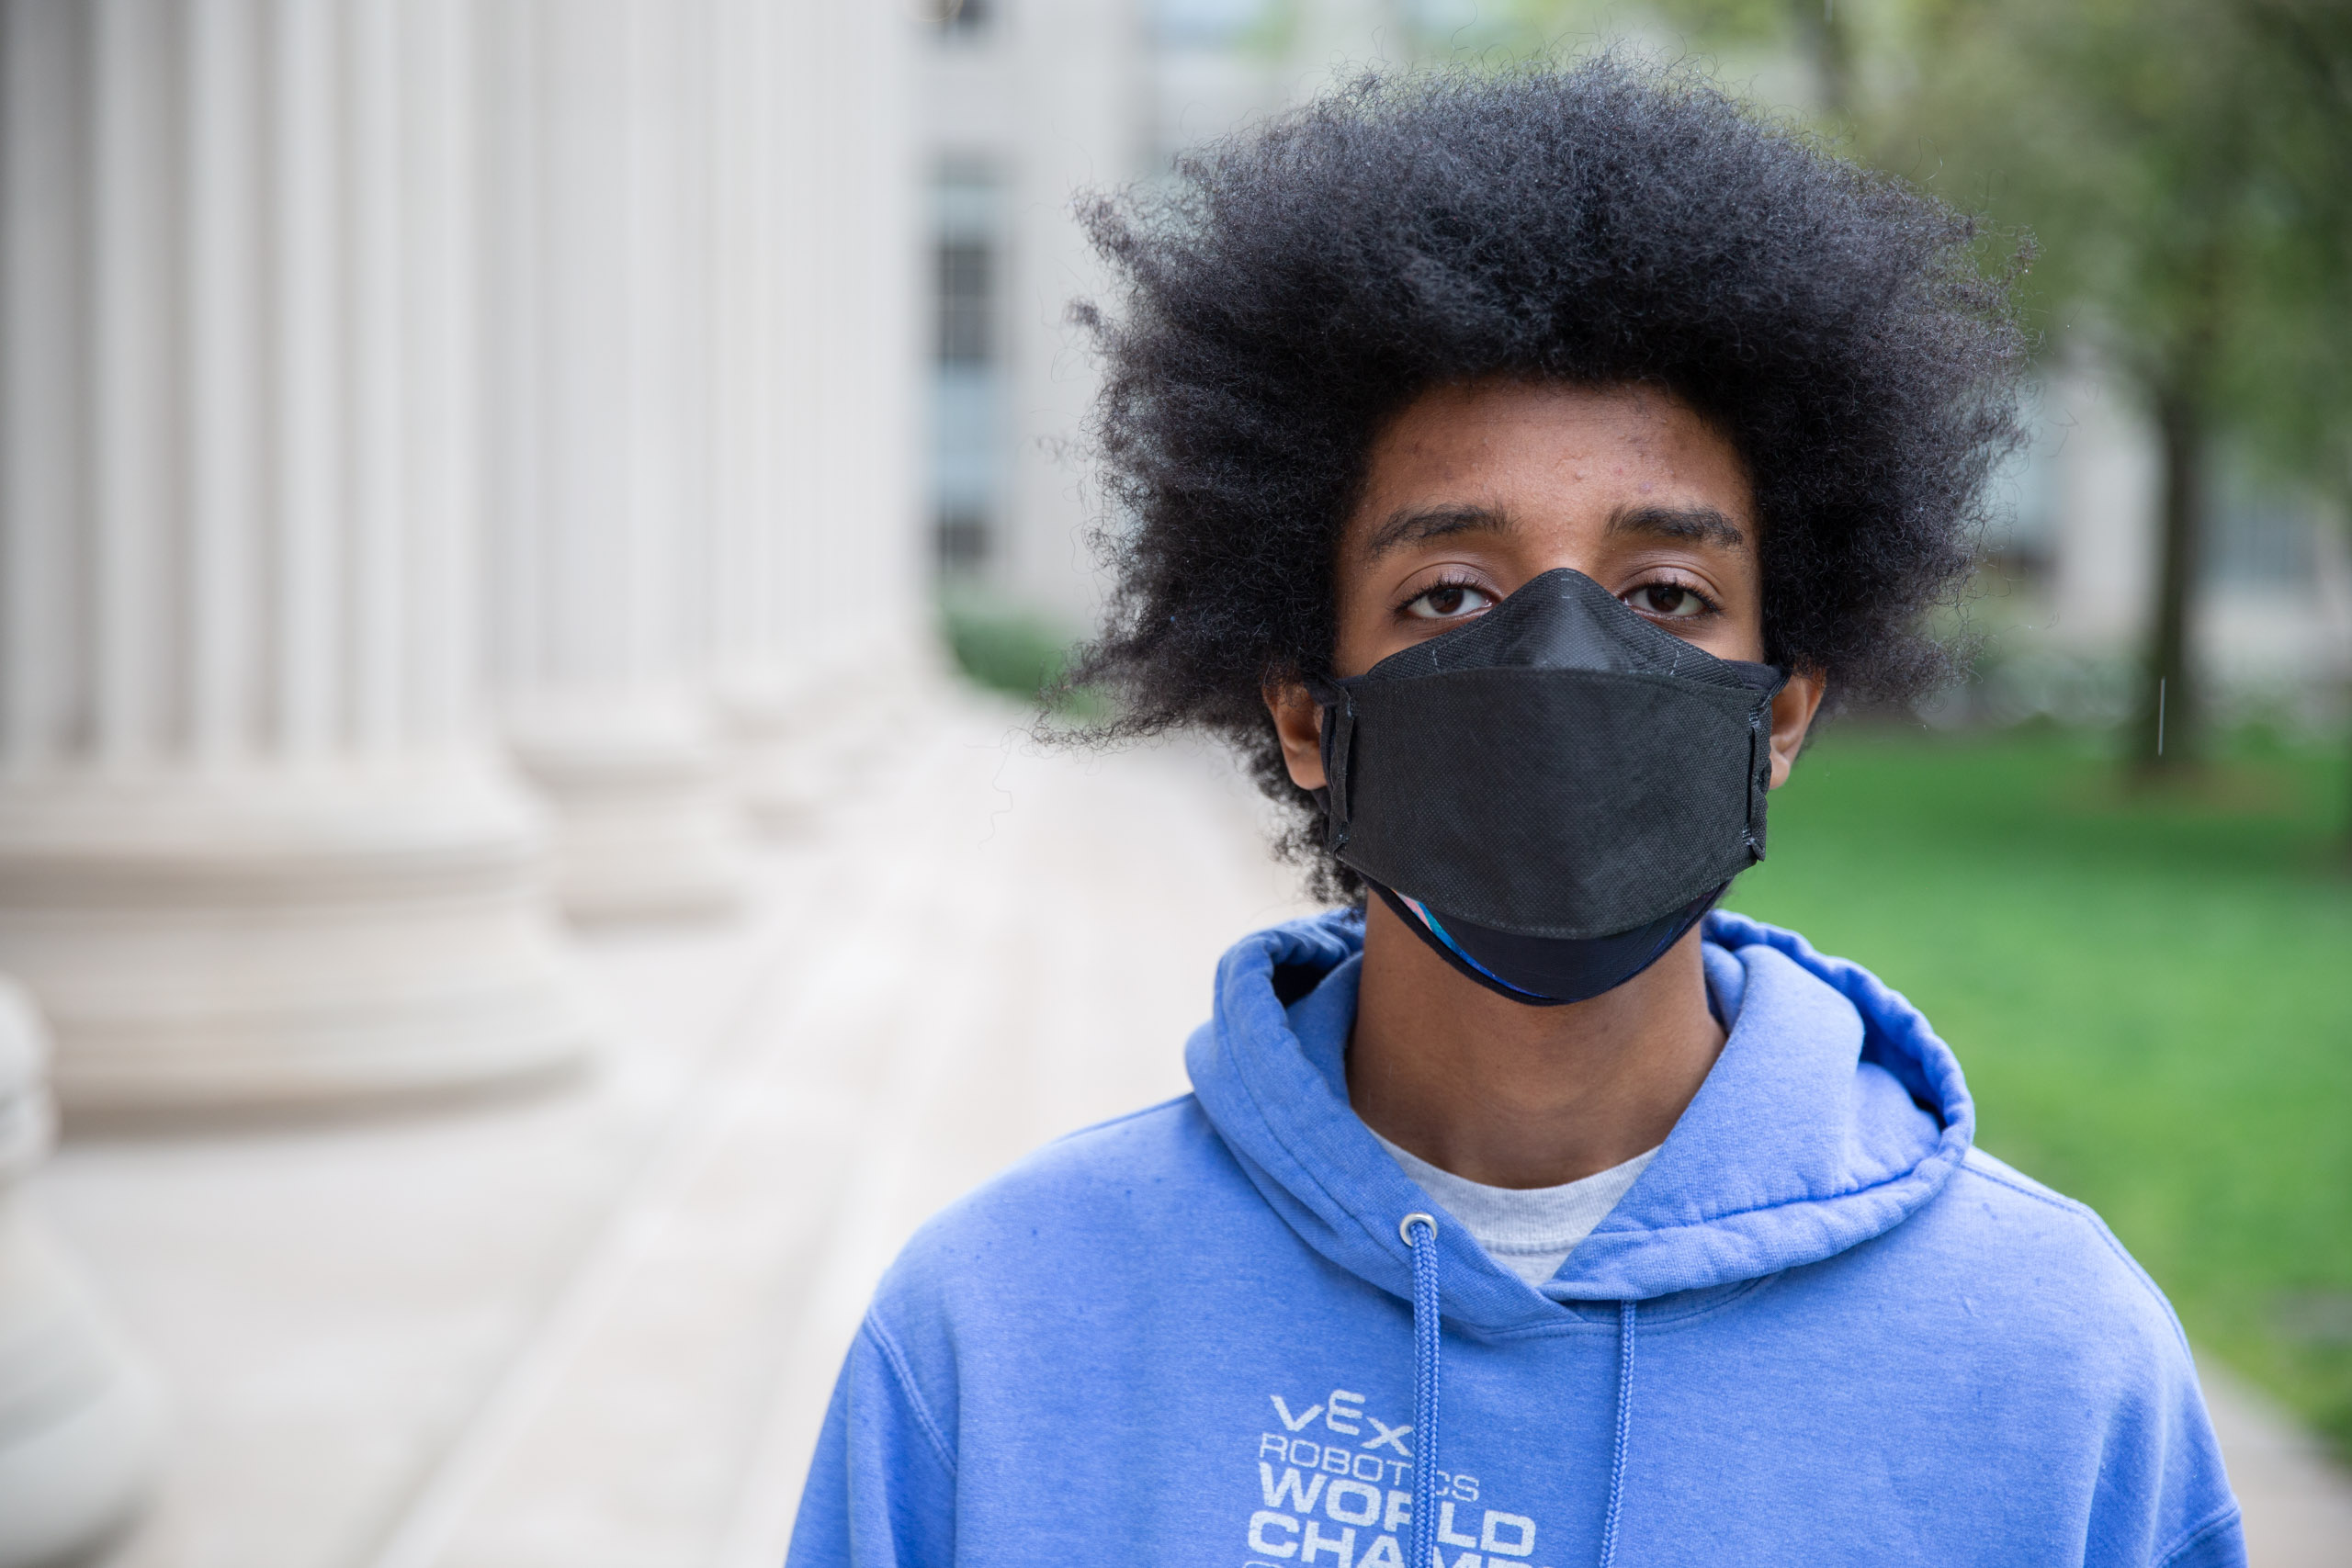 MIT student in Toy design class 2.00b Spring 2021 remove their masks. Series by Photographer Danny Goldfield.